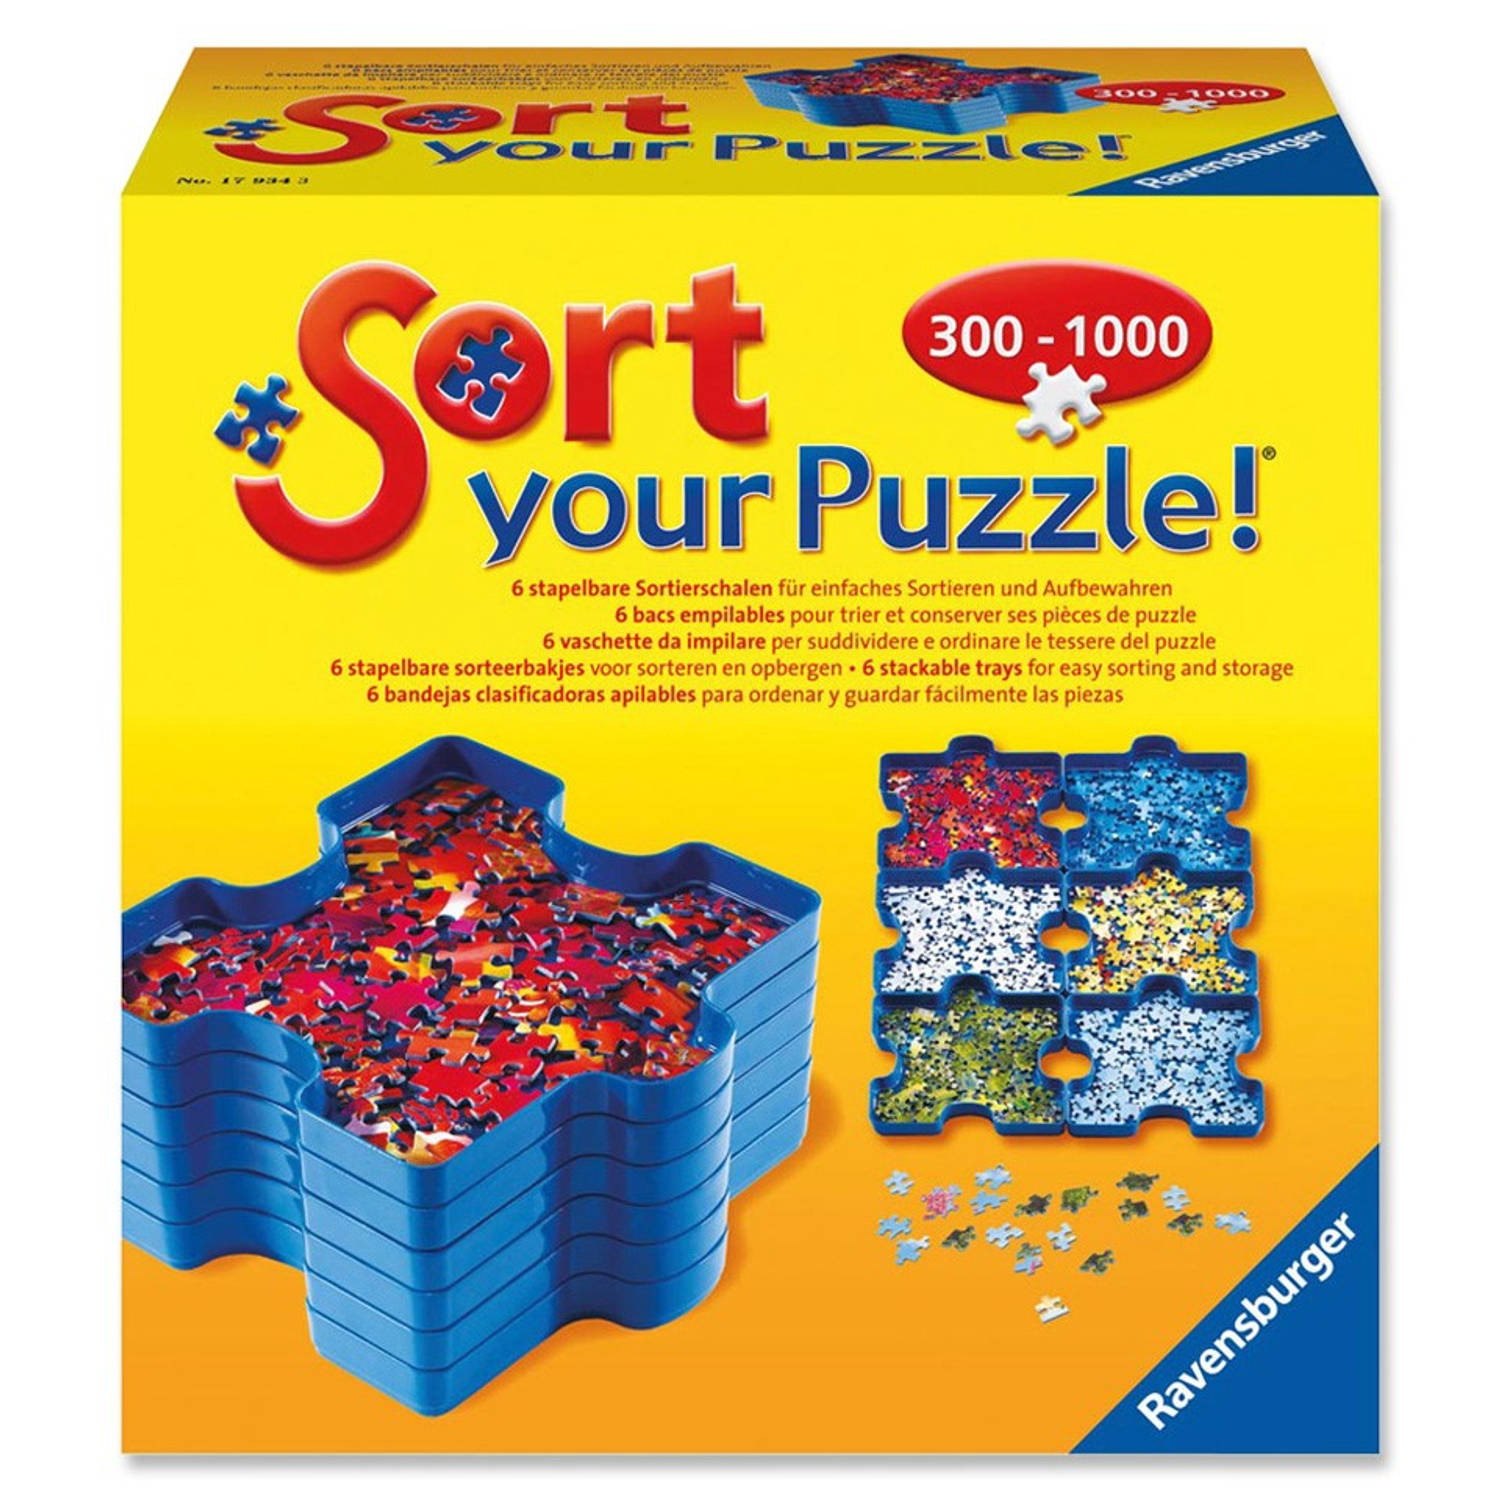 Sort Your Puzzle!